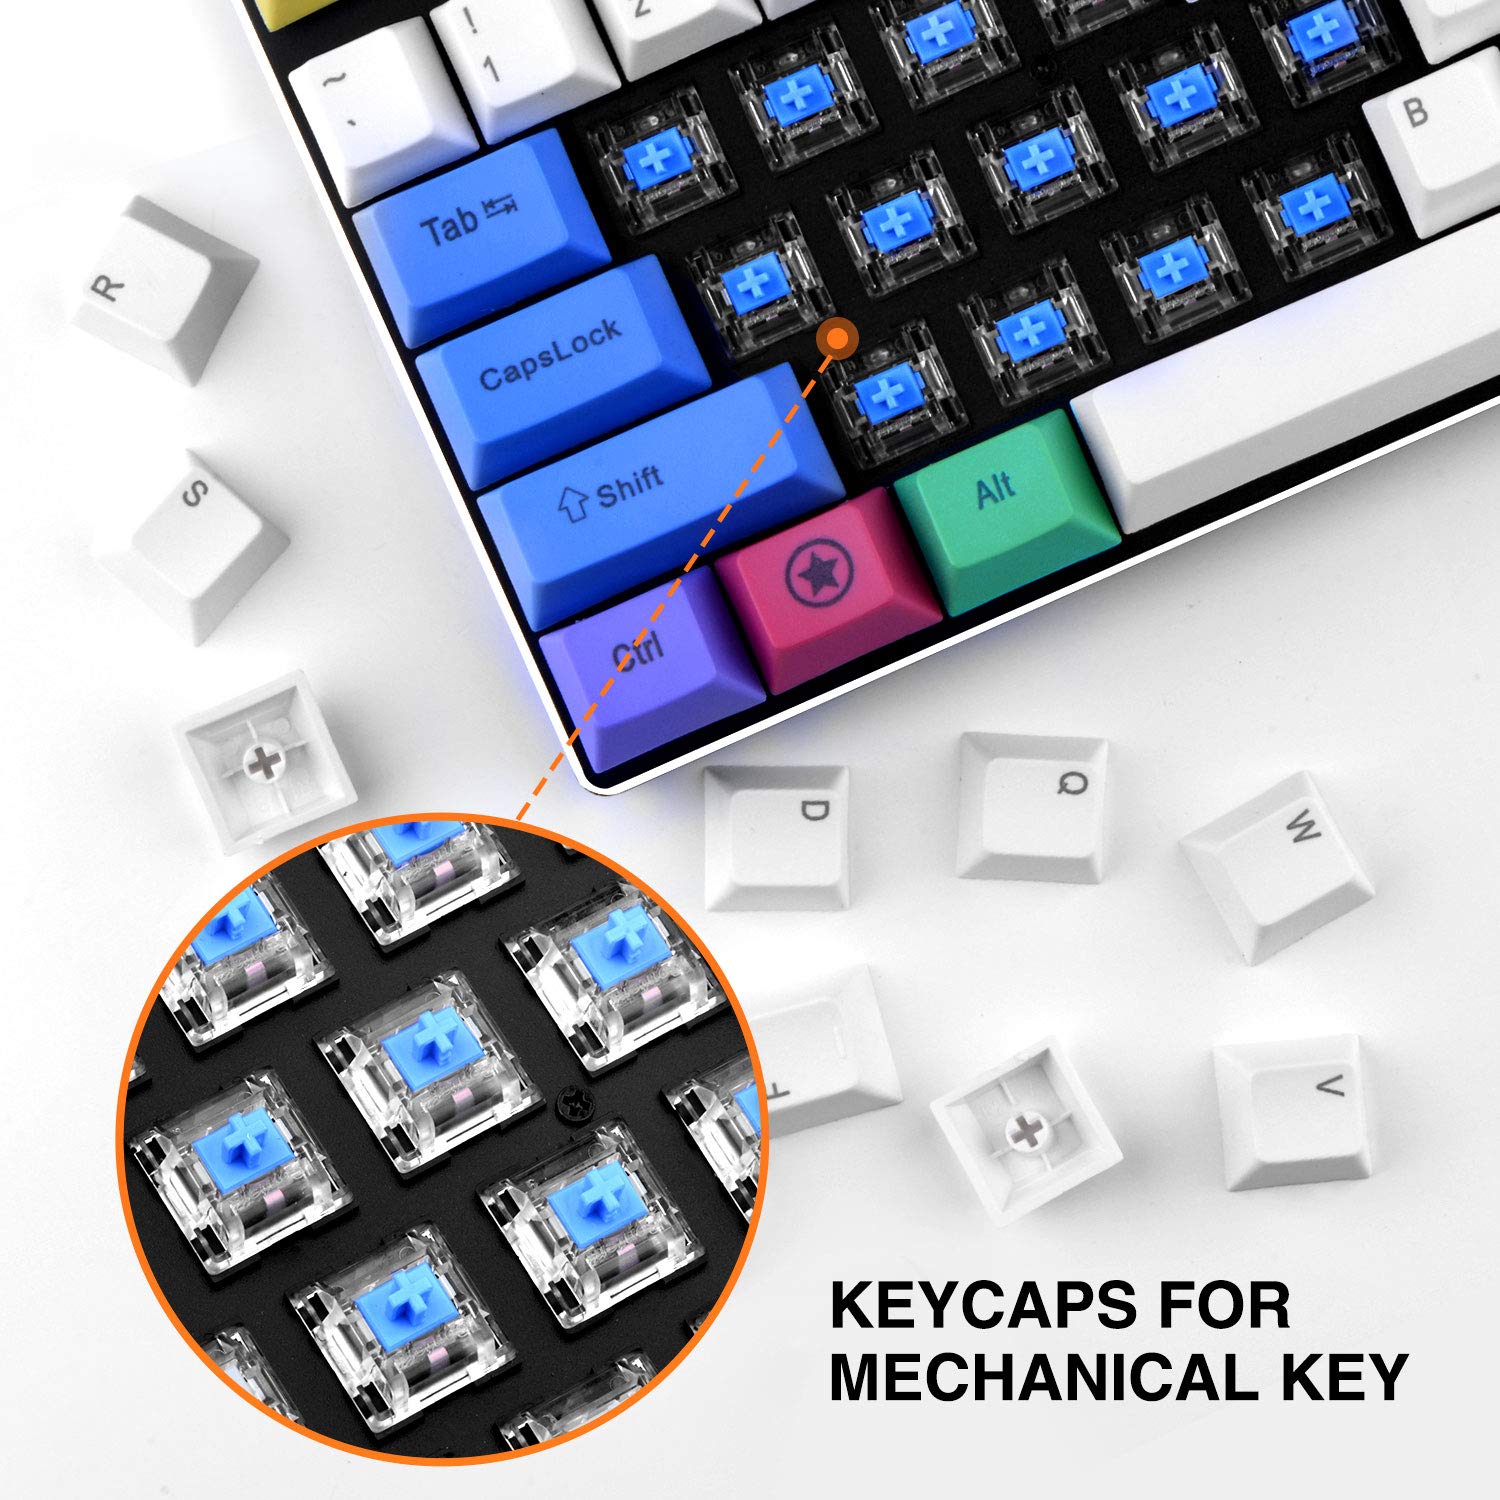 HAVIT KC25 PBT Keycaps 104 Keys with Puller for Cherry MX Mechanical Keyboard (White & Blue &Yellow)